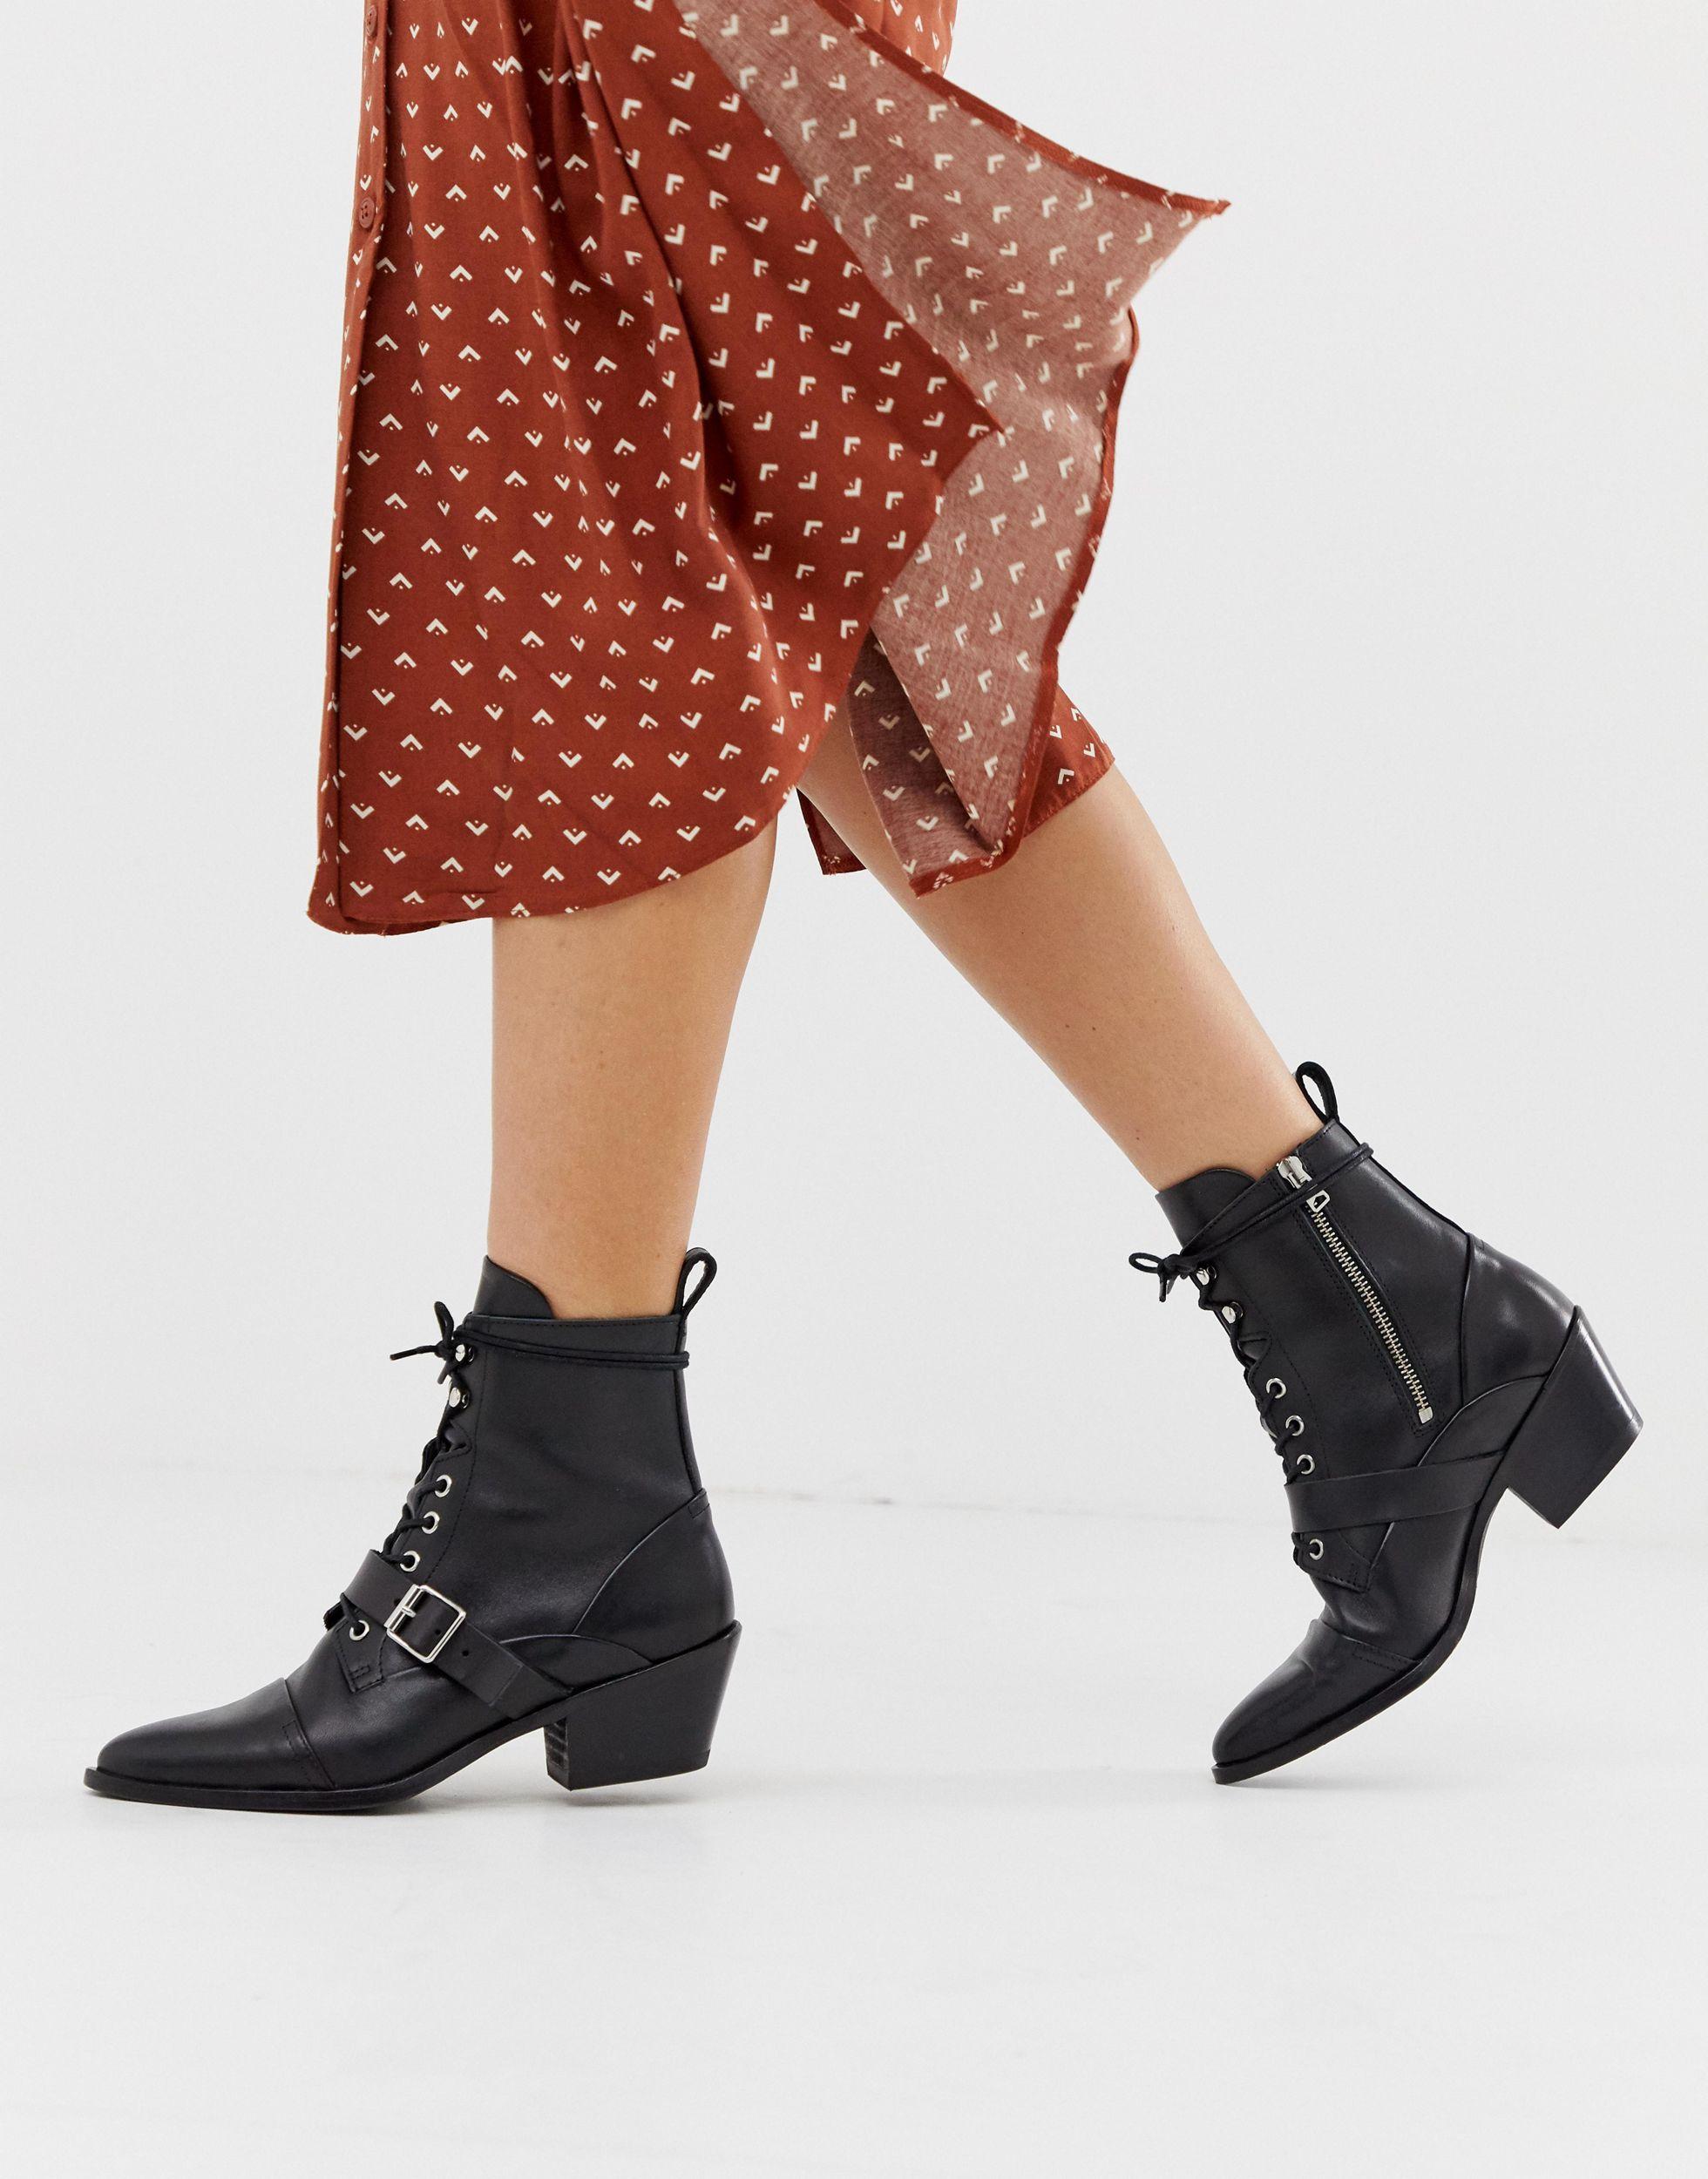 AllSaints Katy Lace Up Heeled Leather Boots With Buckle in Black | Lyst